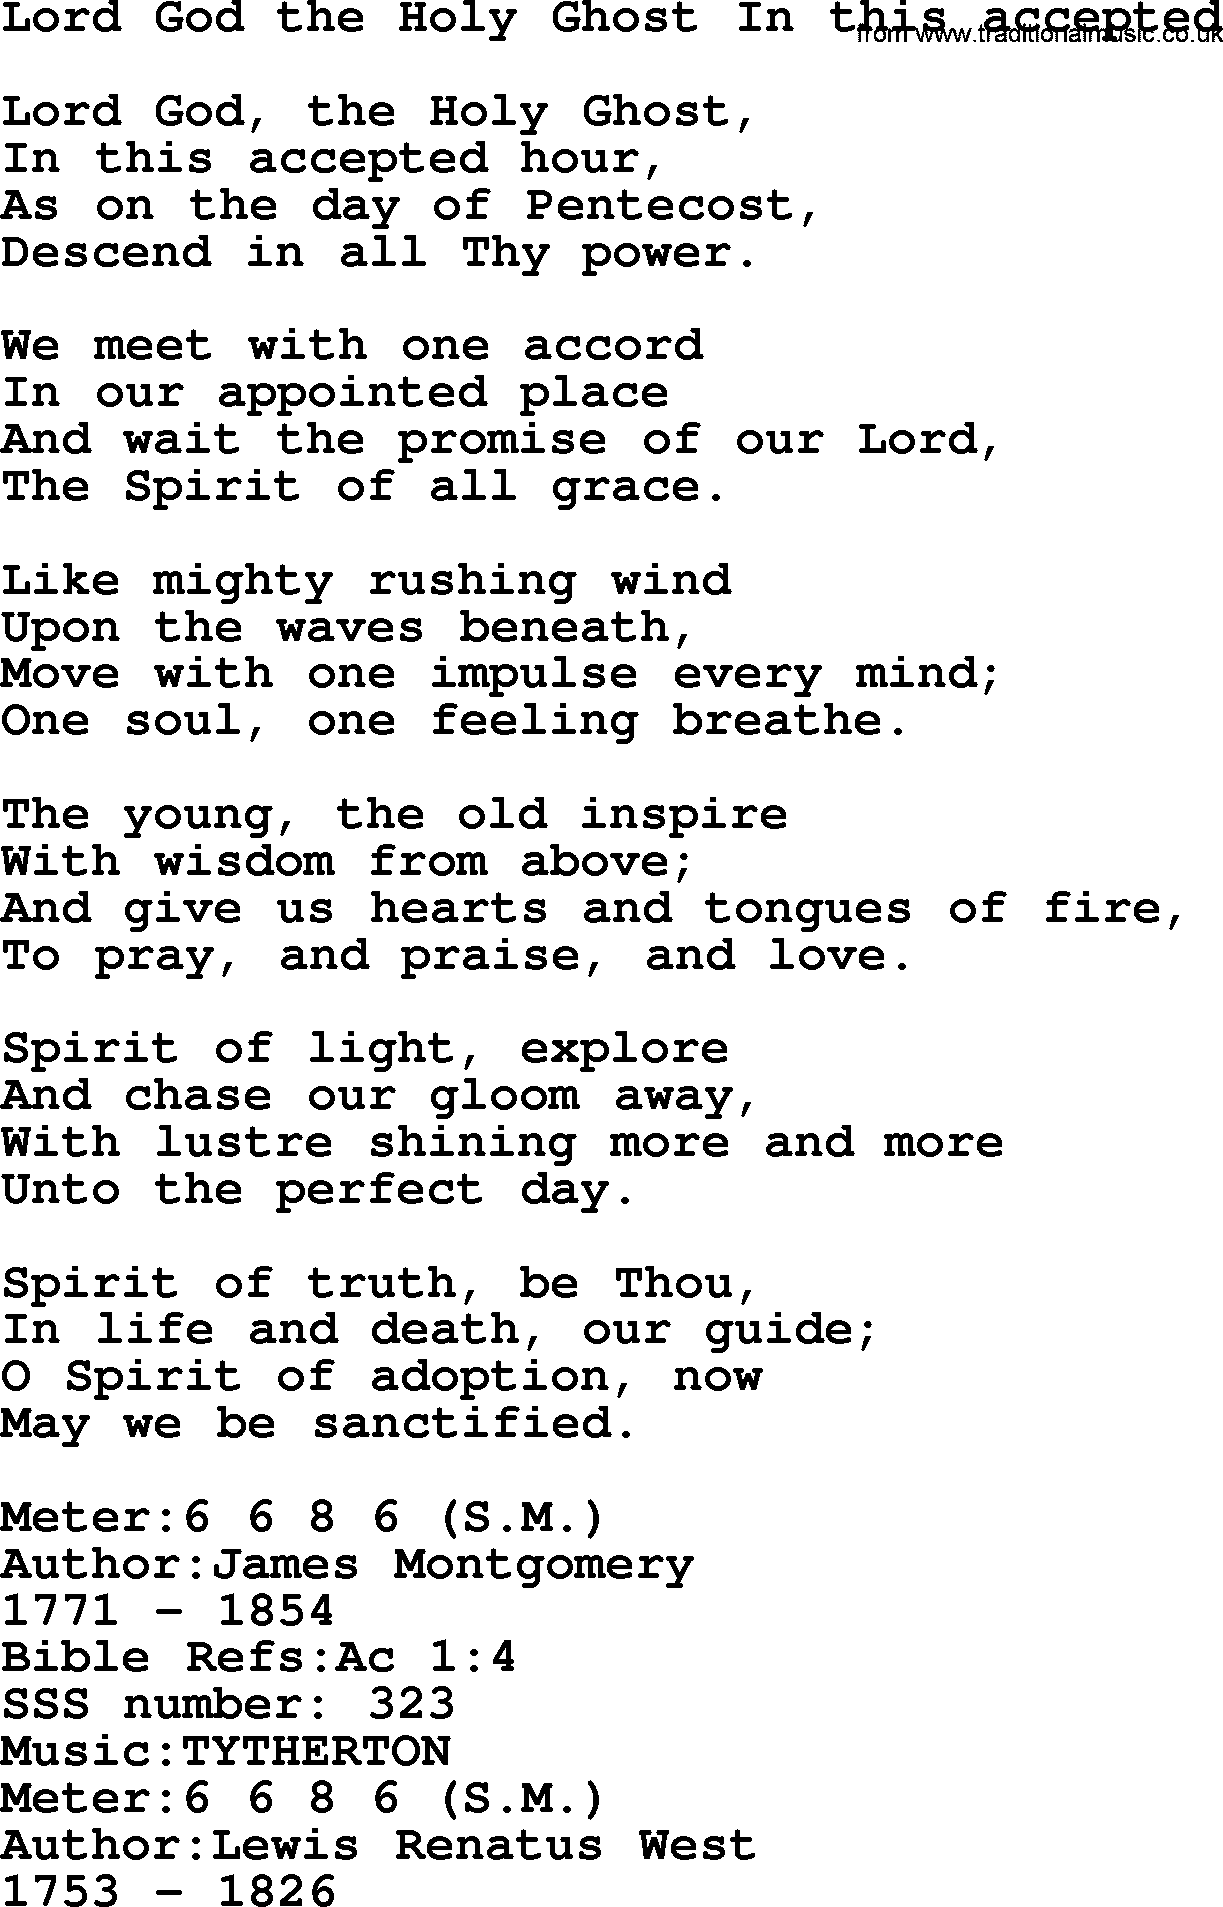 Sacred Songs and Solos complete, 1200 Hymns, title: Lord God The Holy Ghost In This Accepted, lyrics and PDF